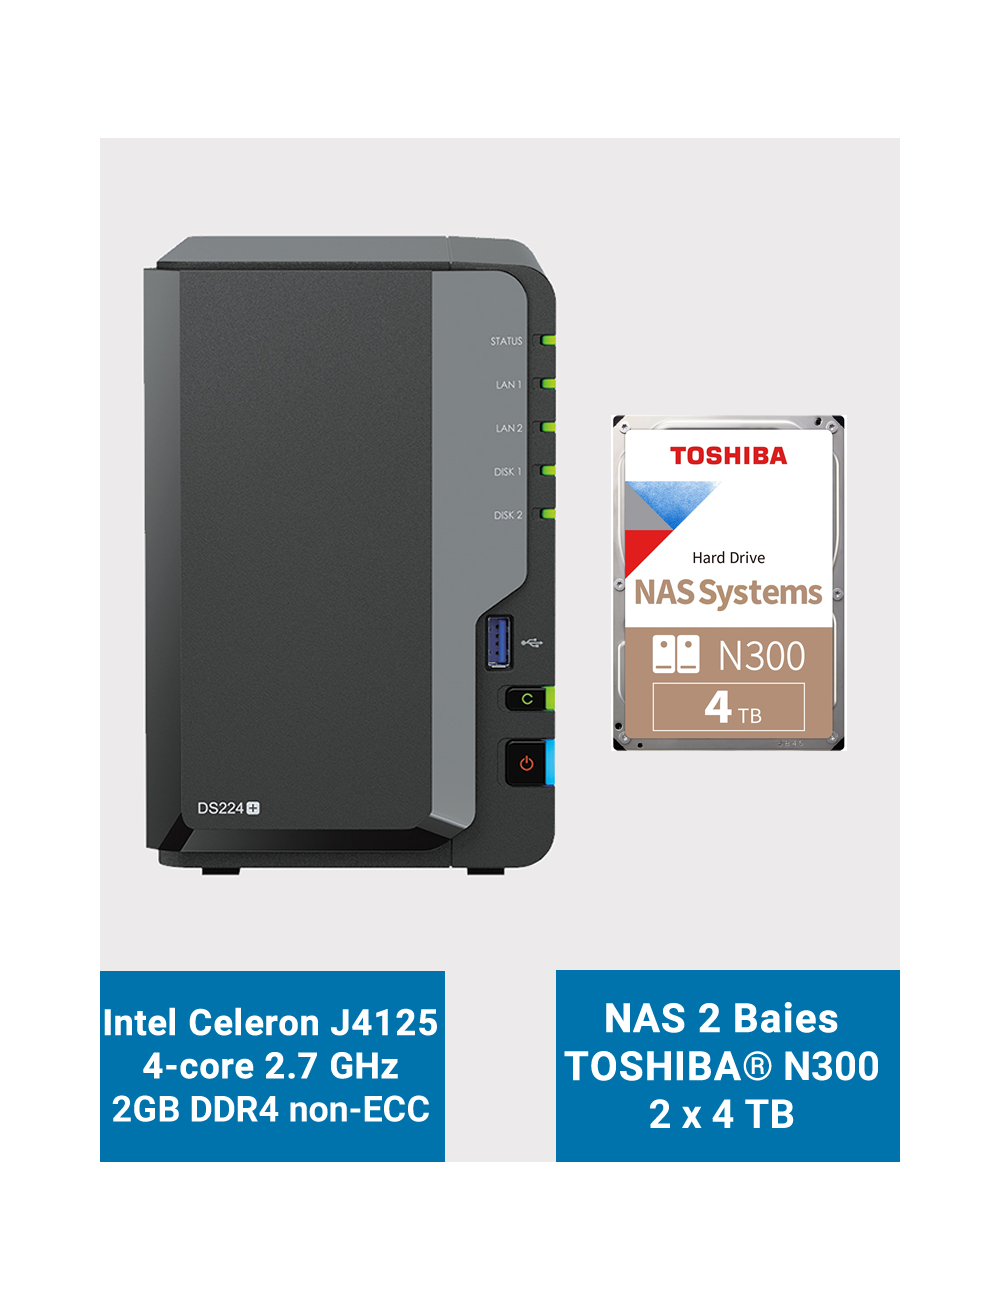 Synology DiskStation DS224+ 2Go Serveur NAS Toshiba N300 8To (2x4To)